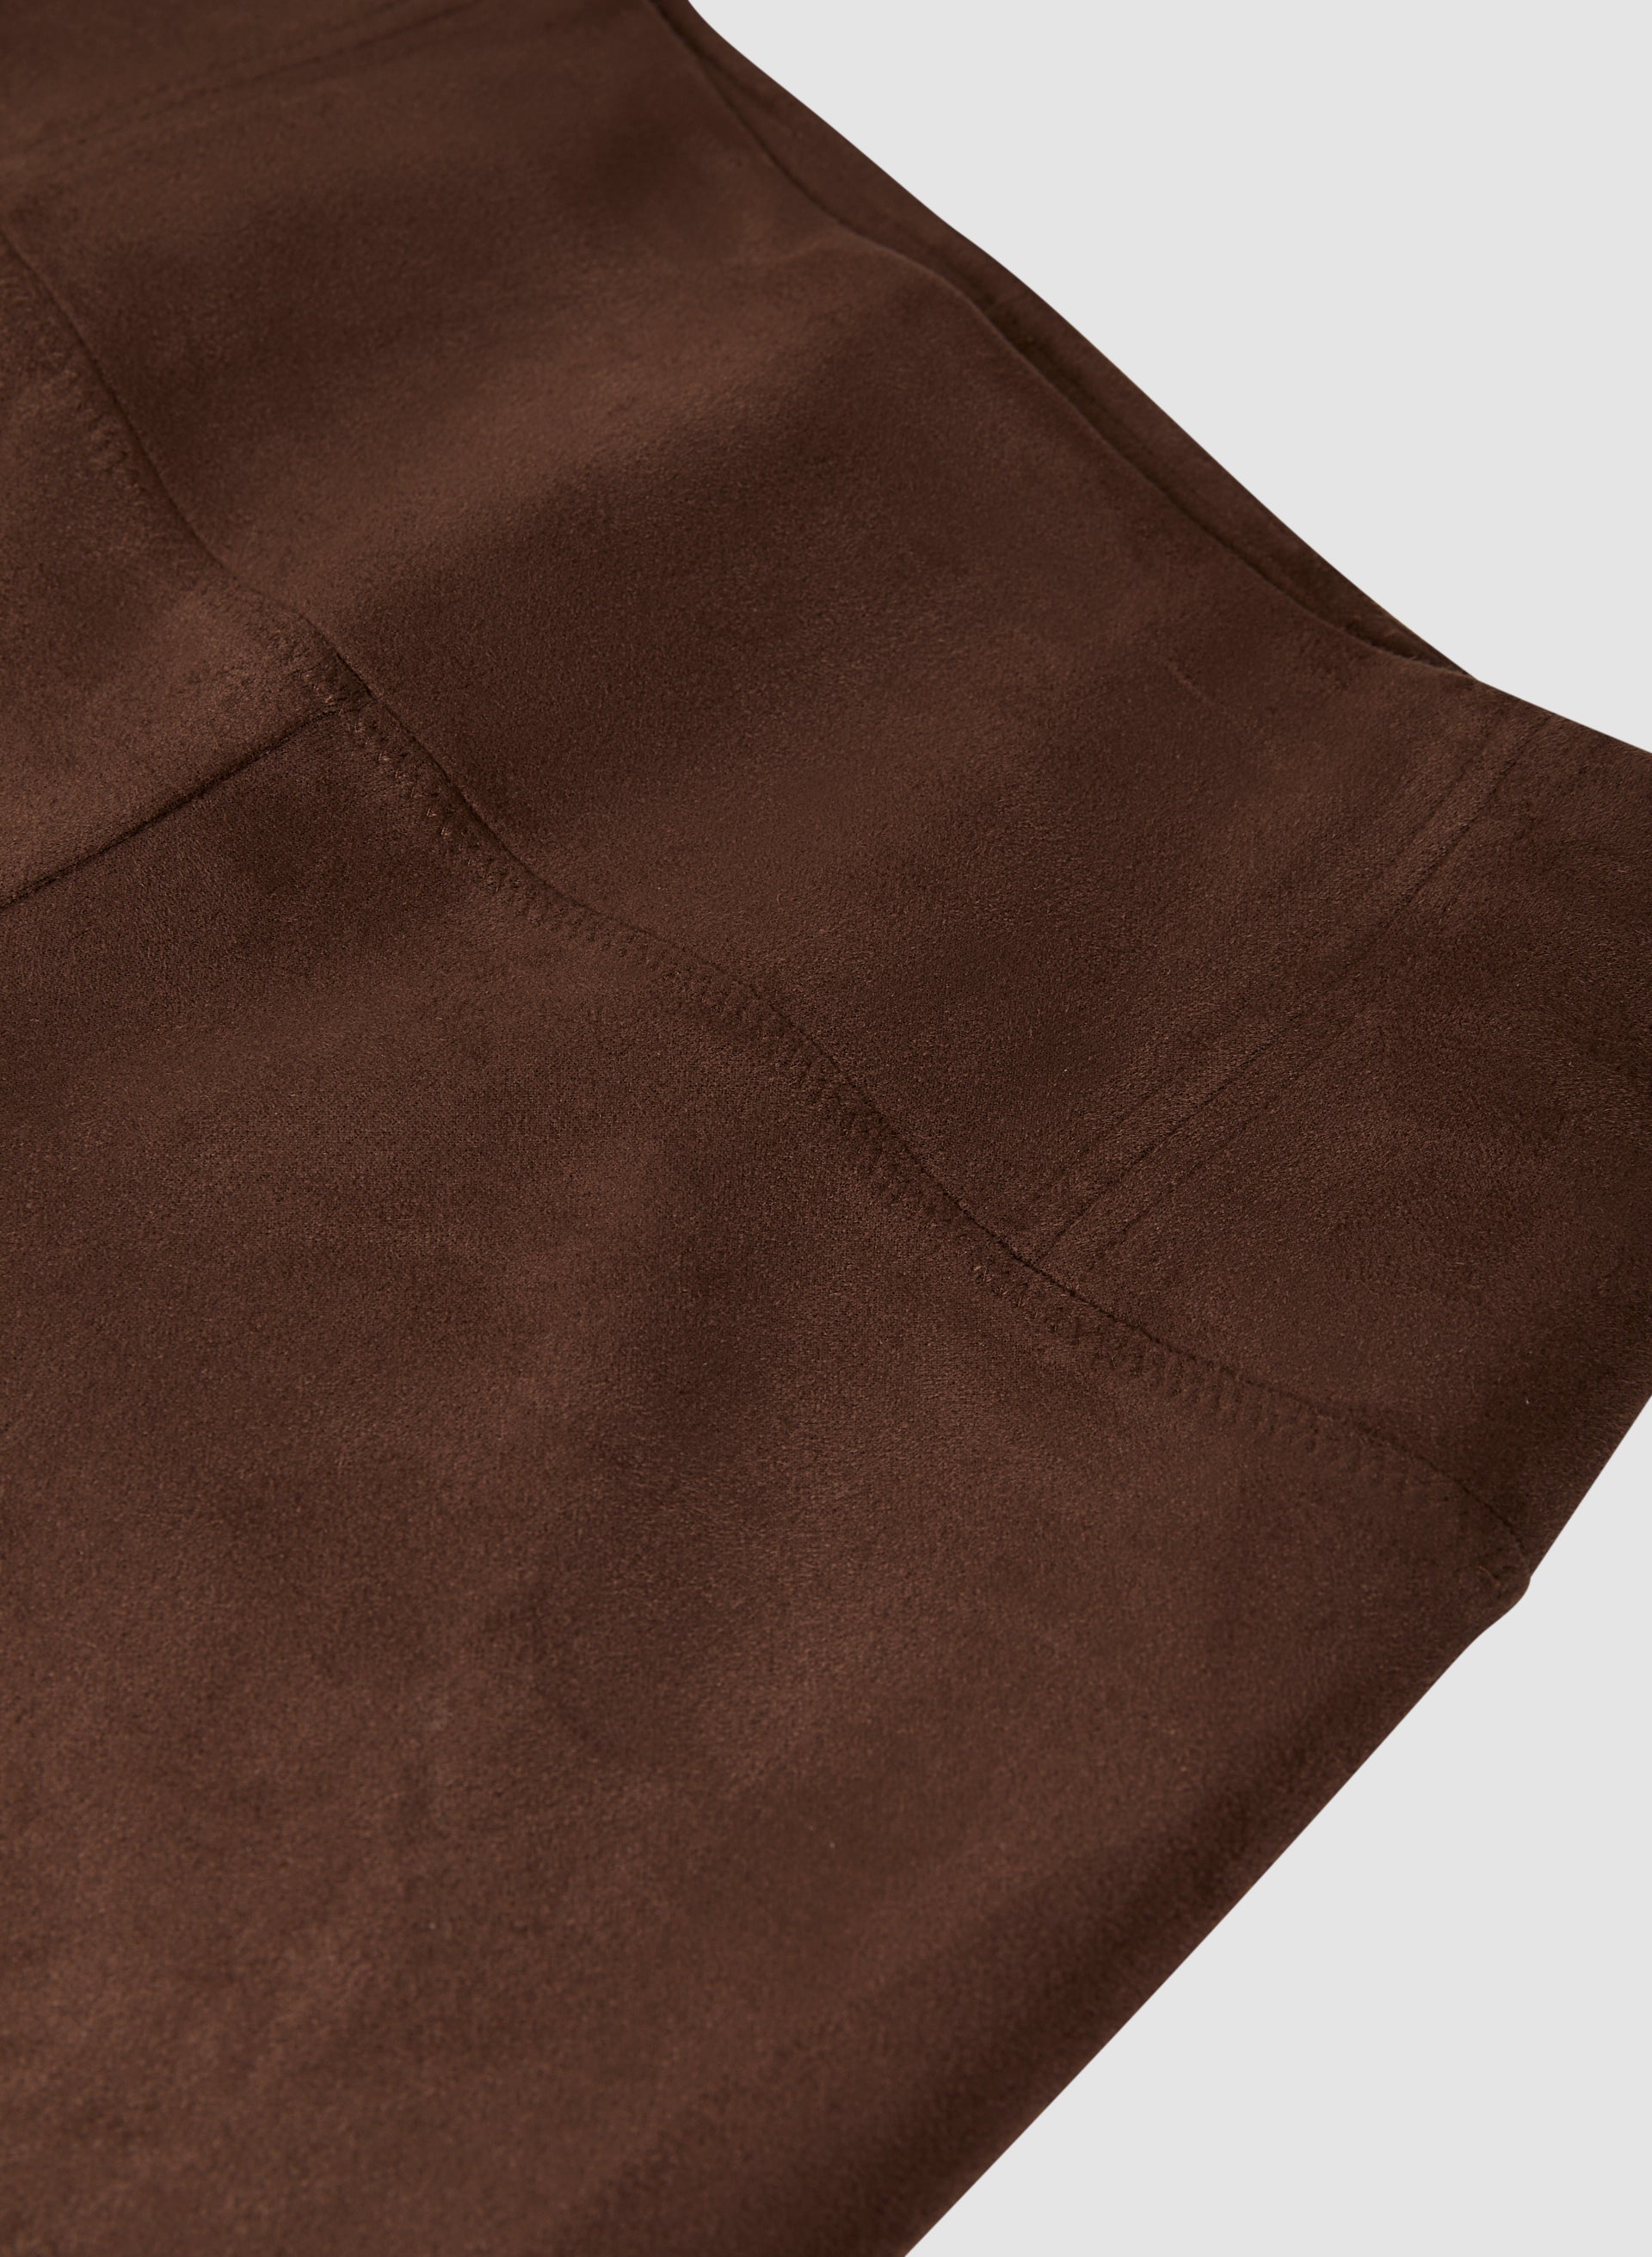 Vegan Suede Fabric Choose From 68 Colors Faux Suede Fabric